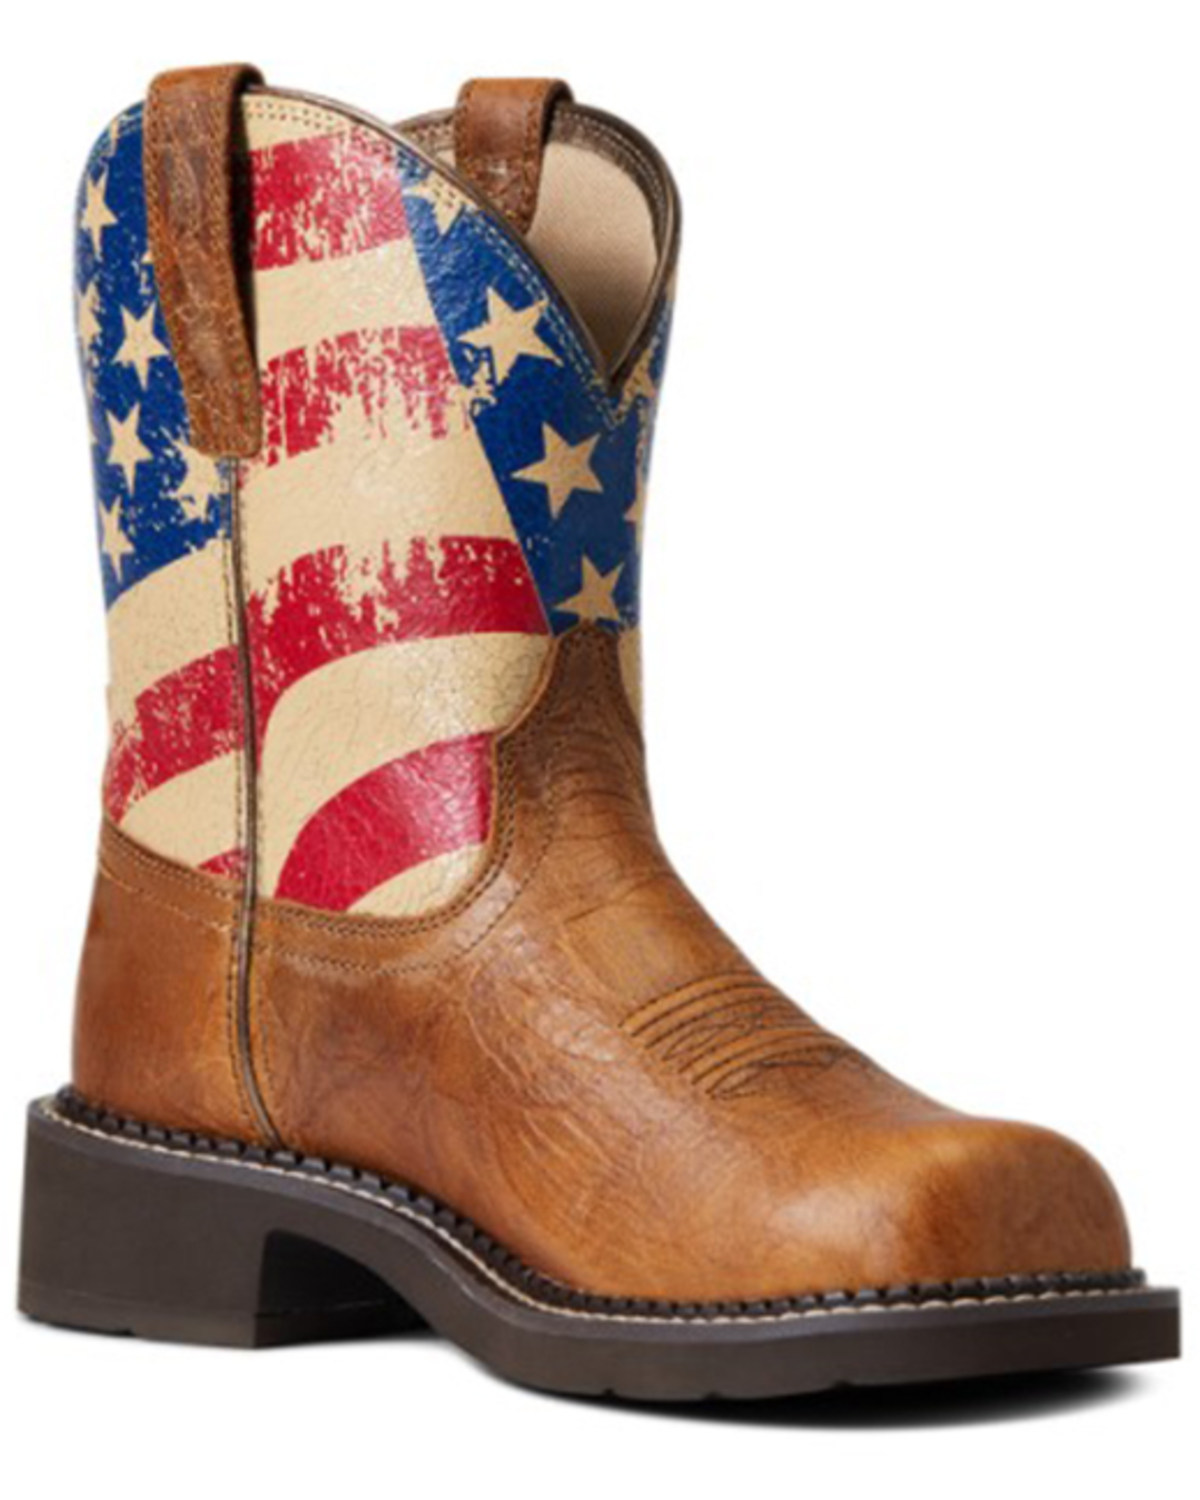 Ariat Women's Heritage Patriot Western Performance Boots - Round Toe